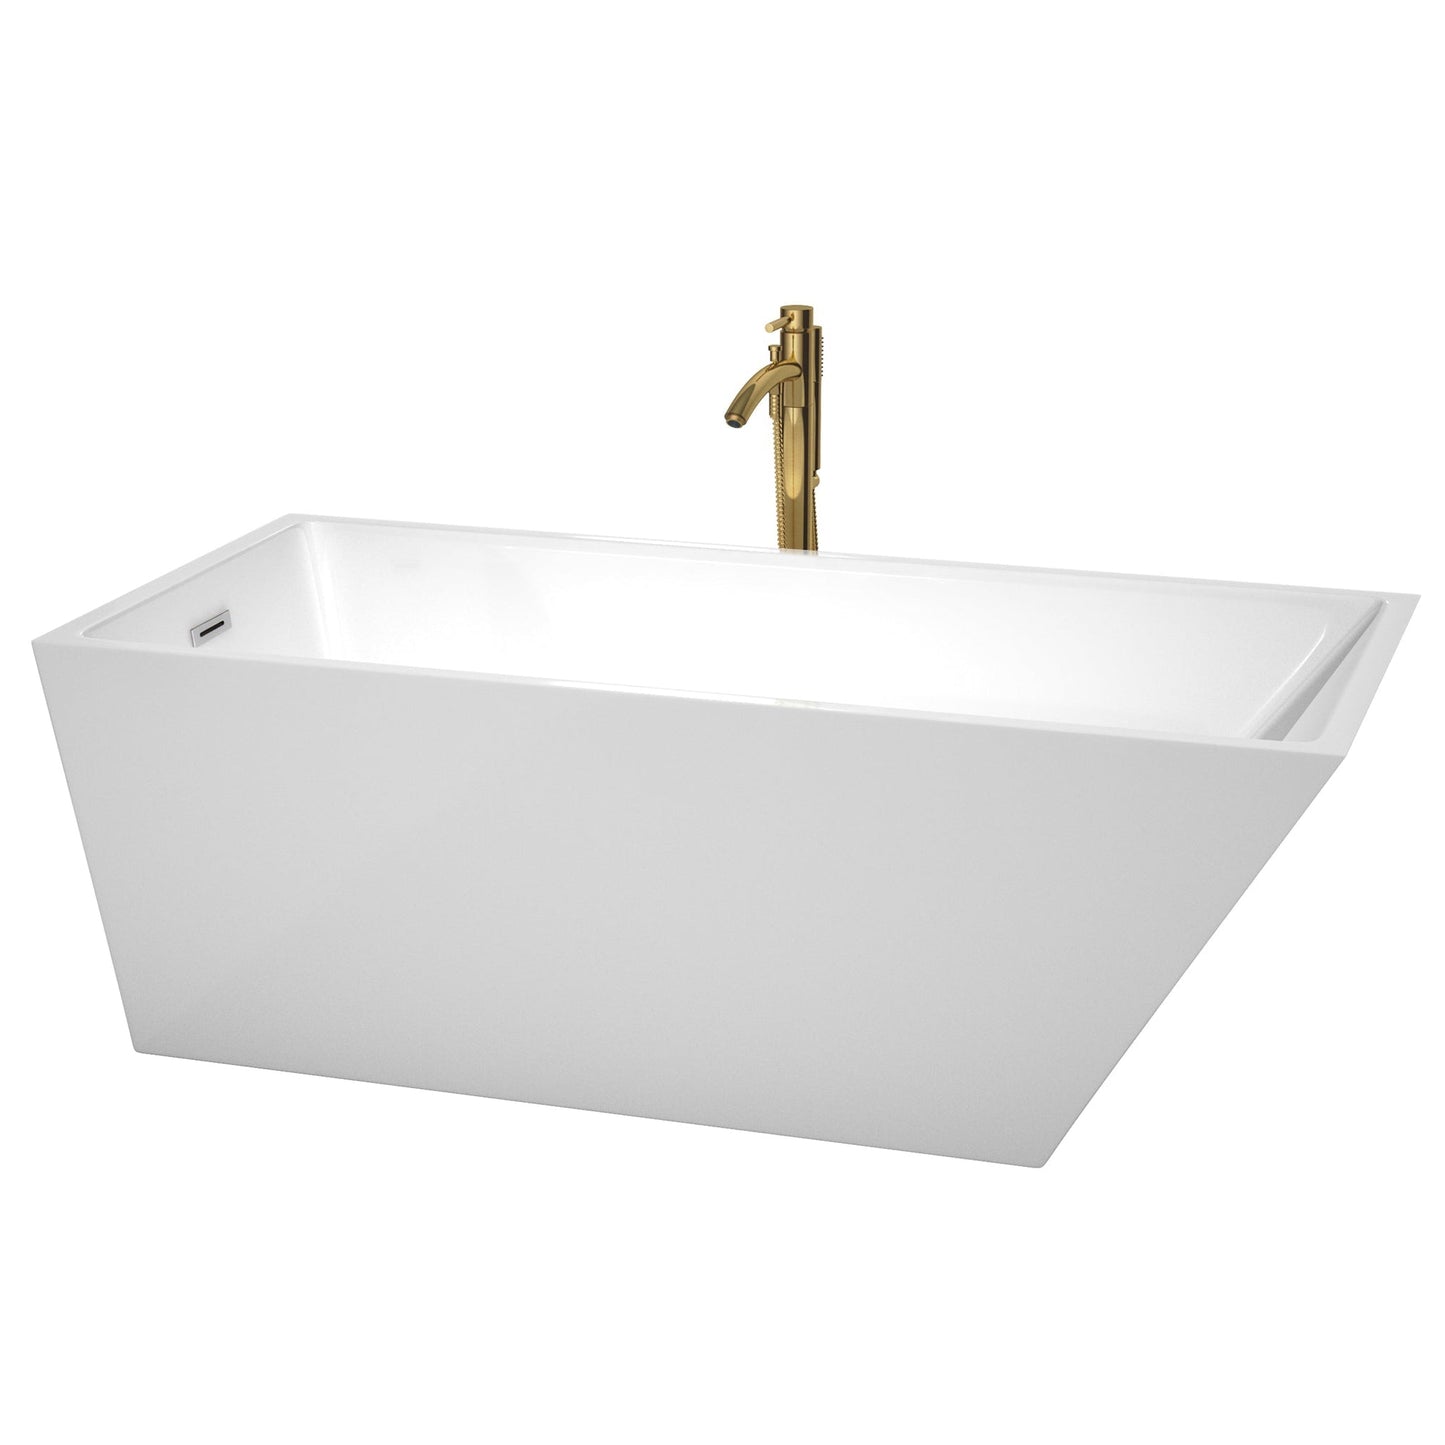 Wyndham Collection Hannah 67" Freestanding Bathtub in White With Polished Chrome Trim and Floor Mounted Faucet in Brushed Gold